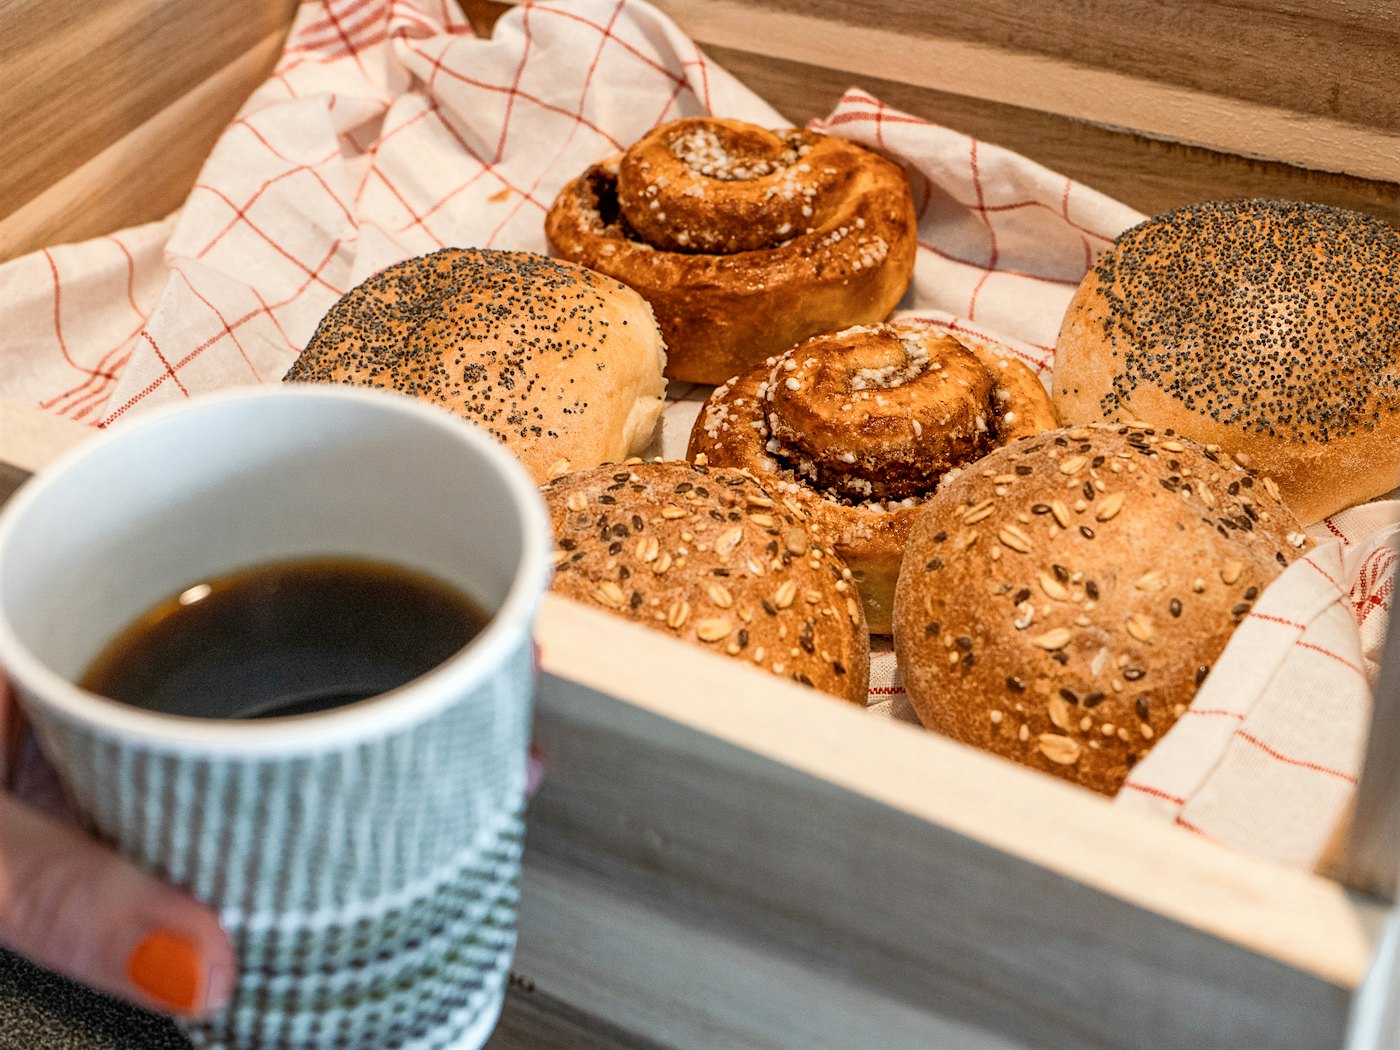 Wooden box with cinnamon buns and rolls, coffee cup in the foreground. Photo